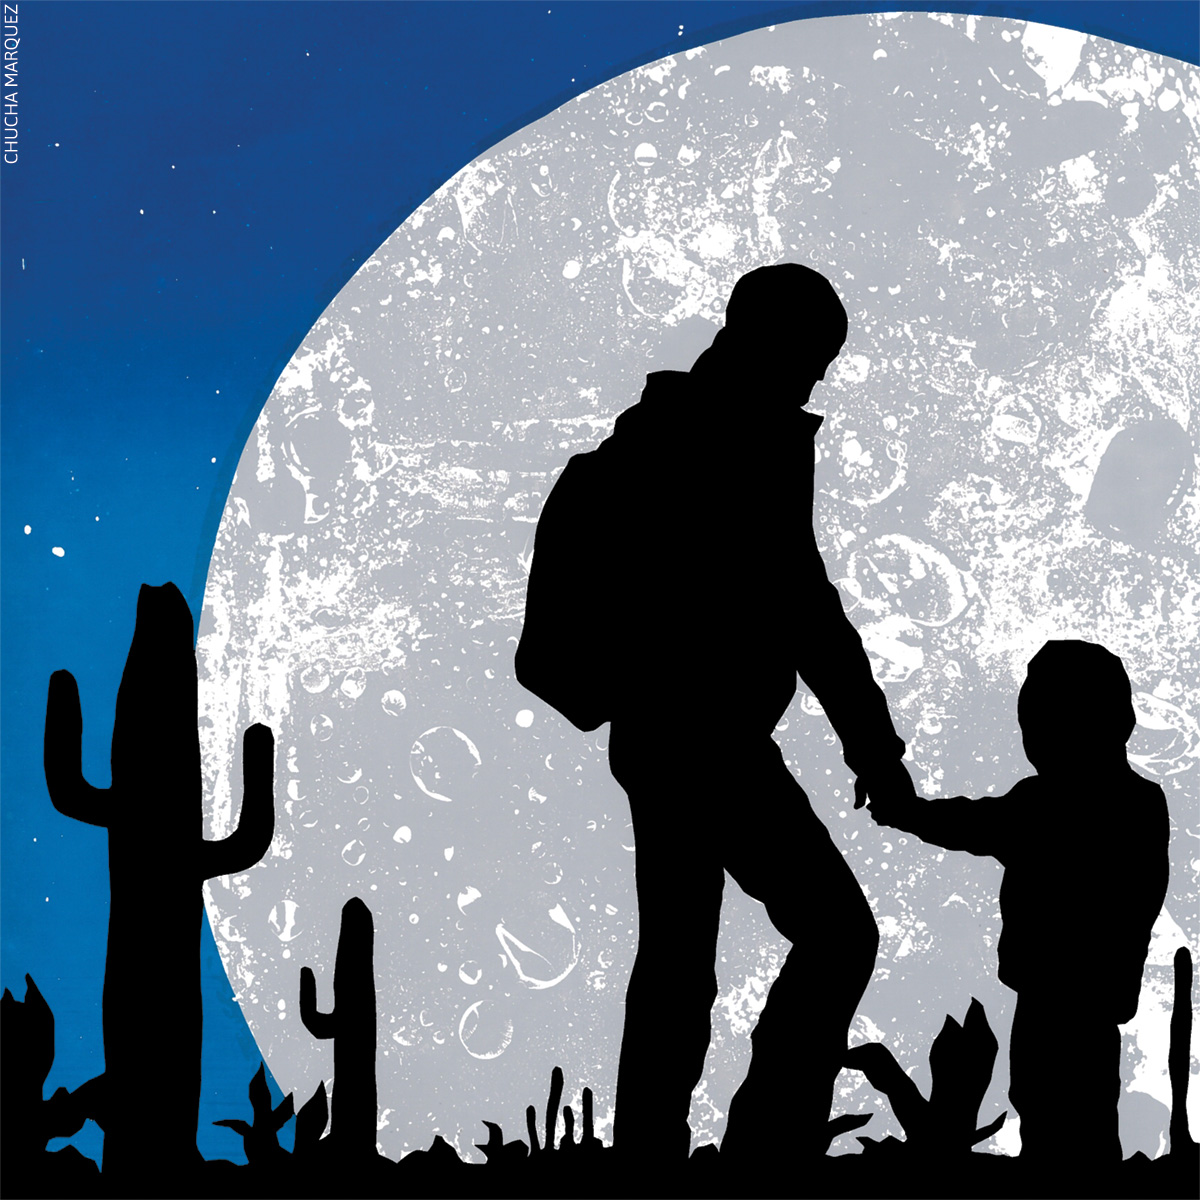 Parent and child silhouettes holding hands standing in front of large moon, night sky, and silhouette of desert cacti. 